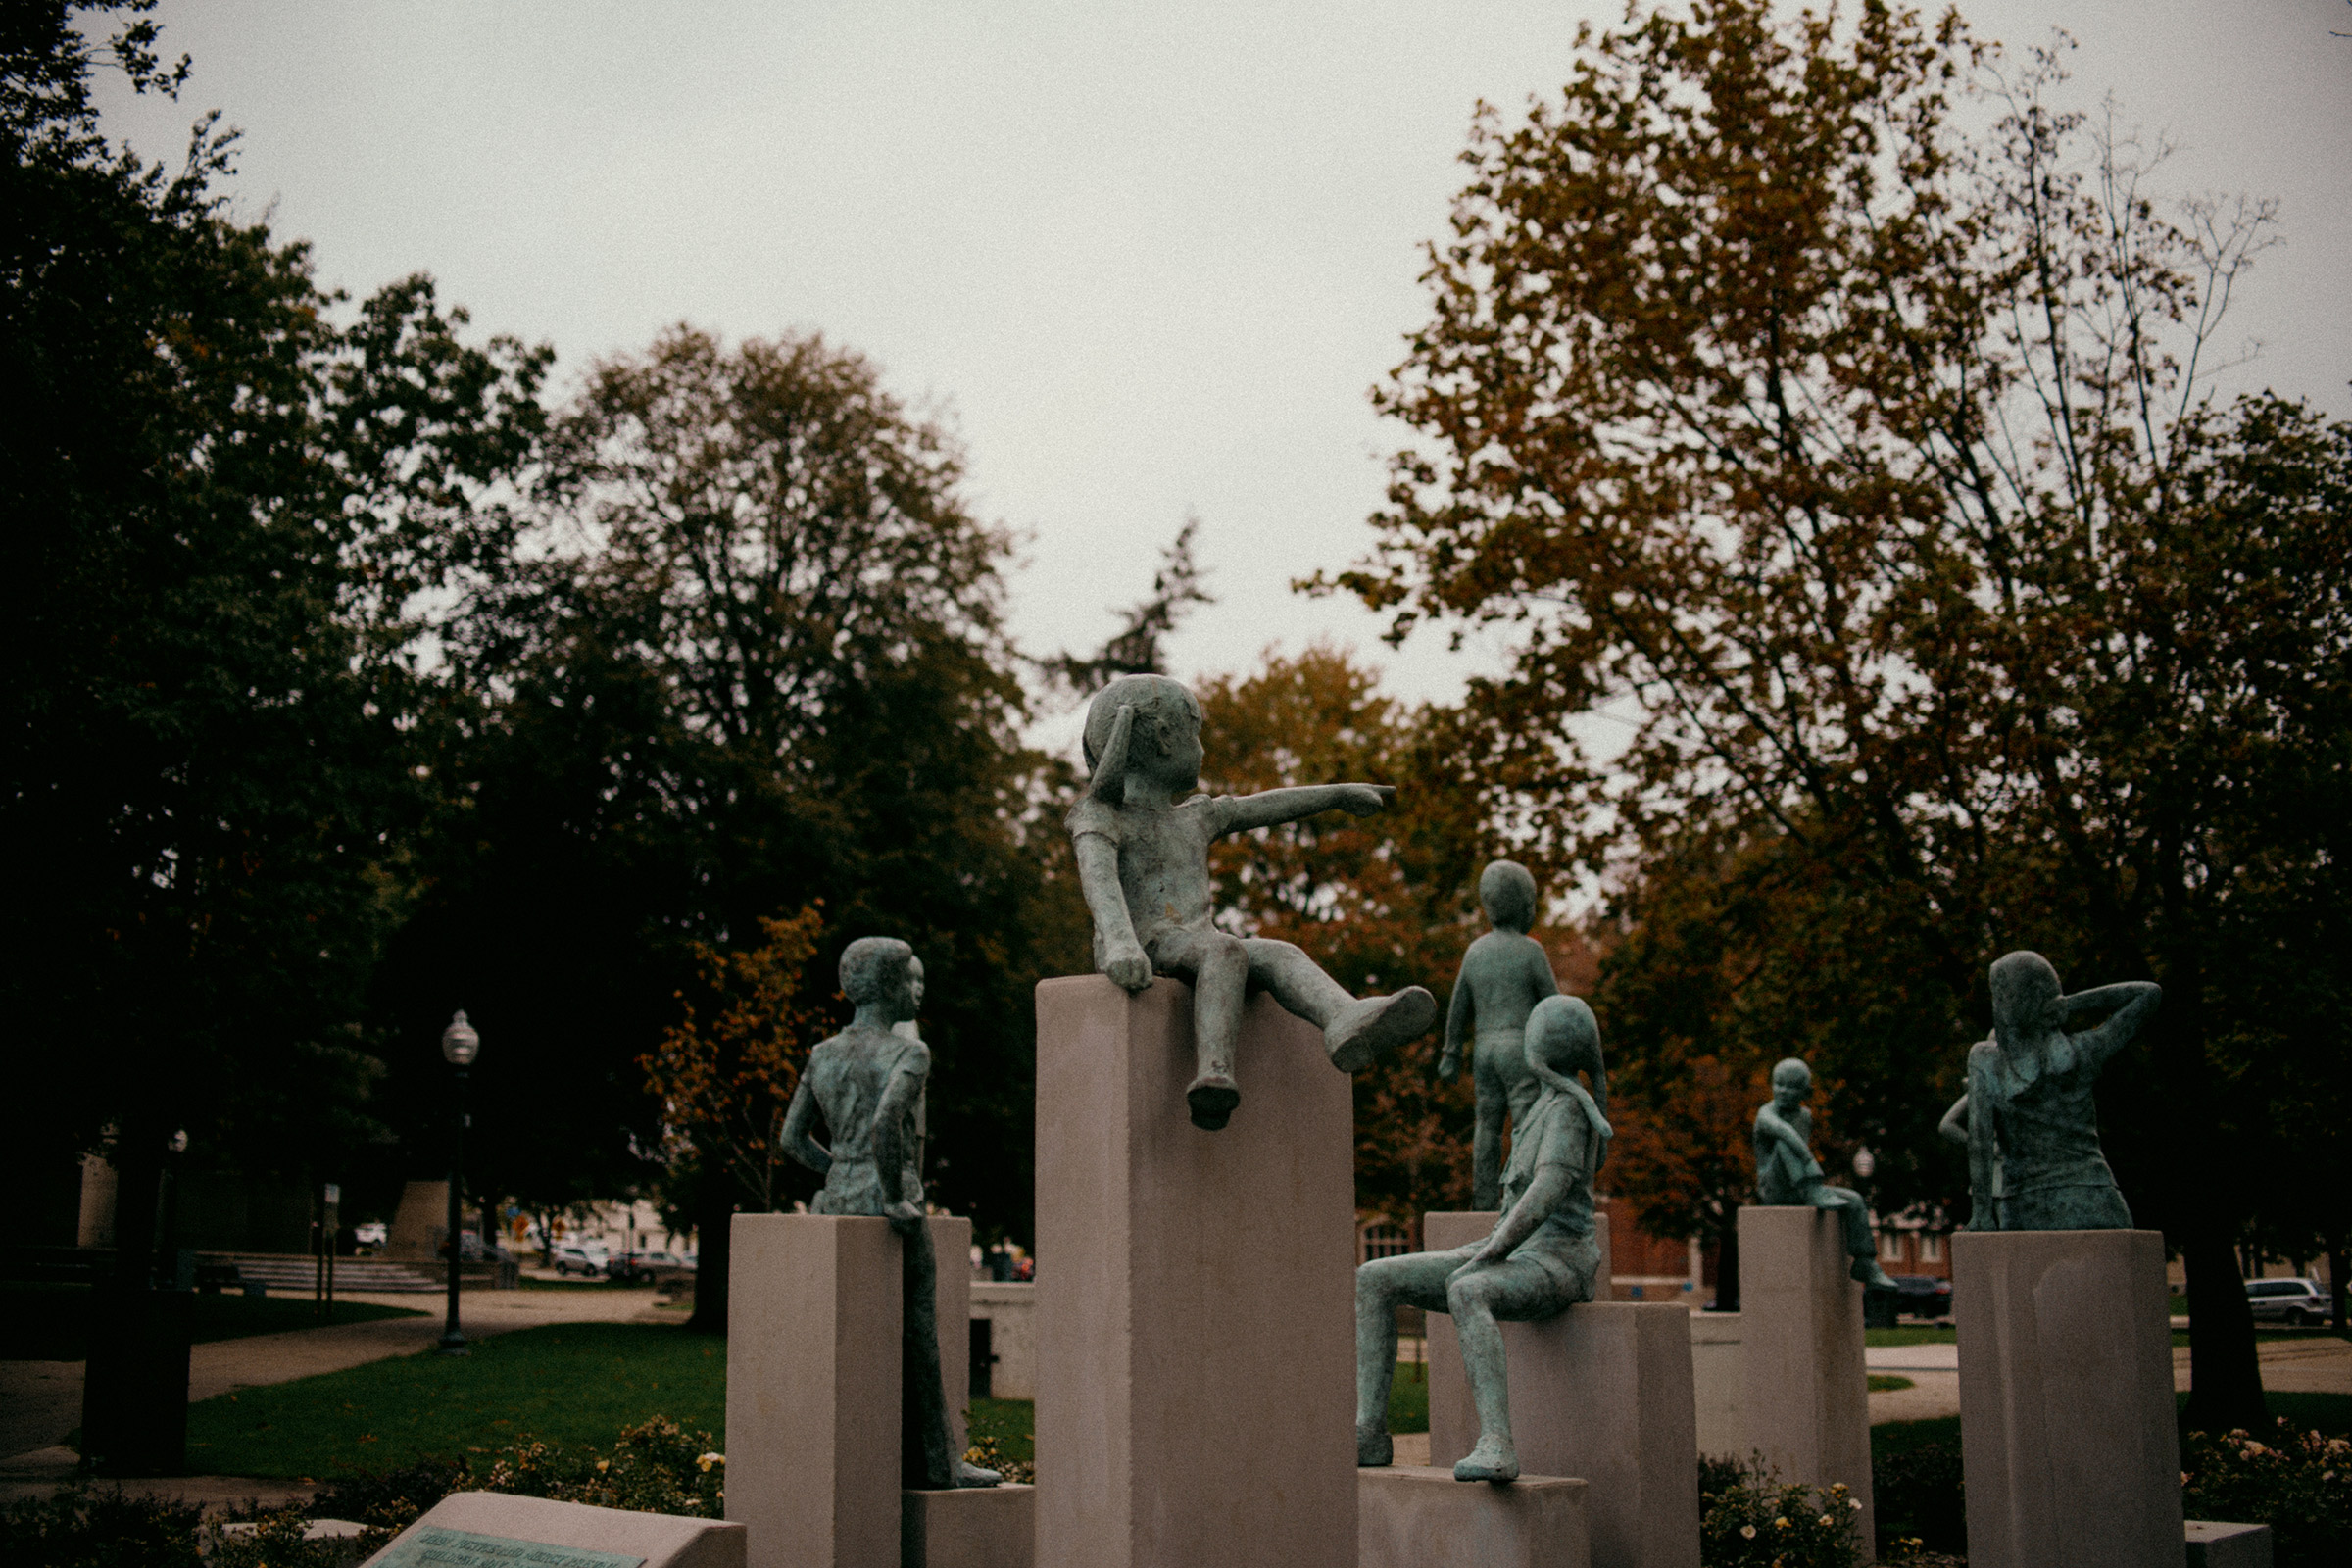 A sculpture in Bronson Park in downtown Kalamazoo. (Akilah Townsend for TIME)